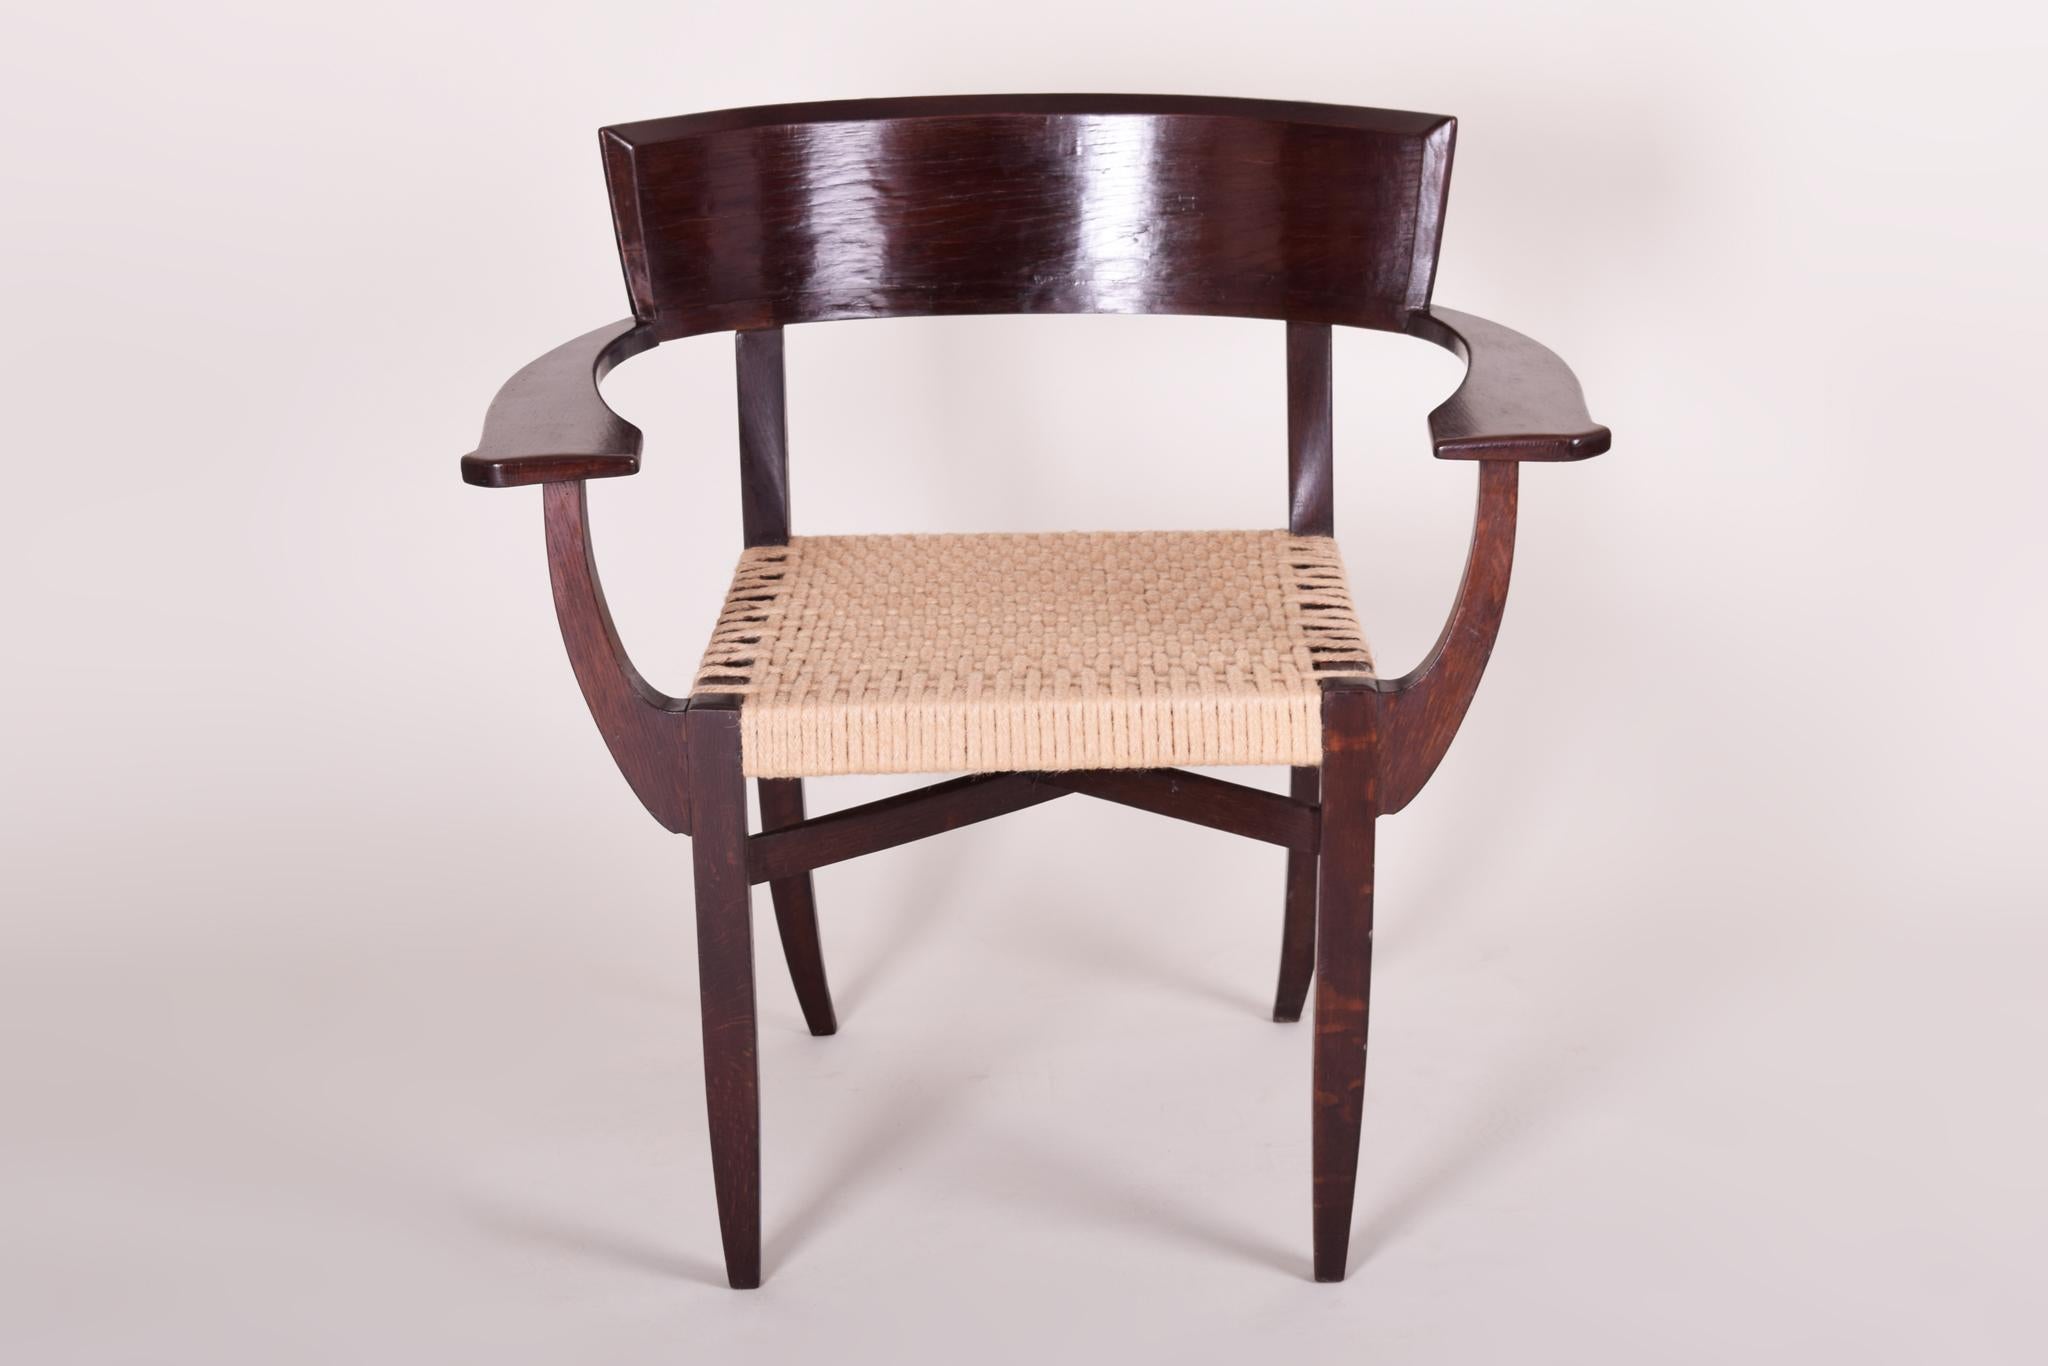 Unique armchair. Material: Oak
Completely restored, surface is polished by shellac.